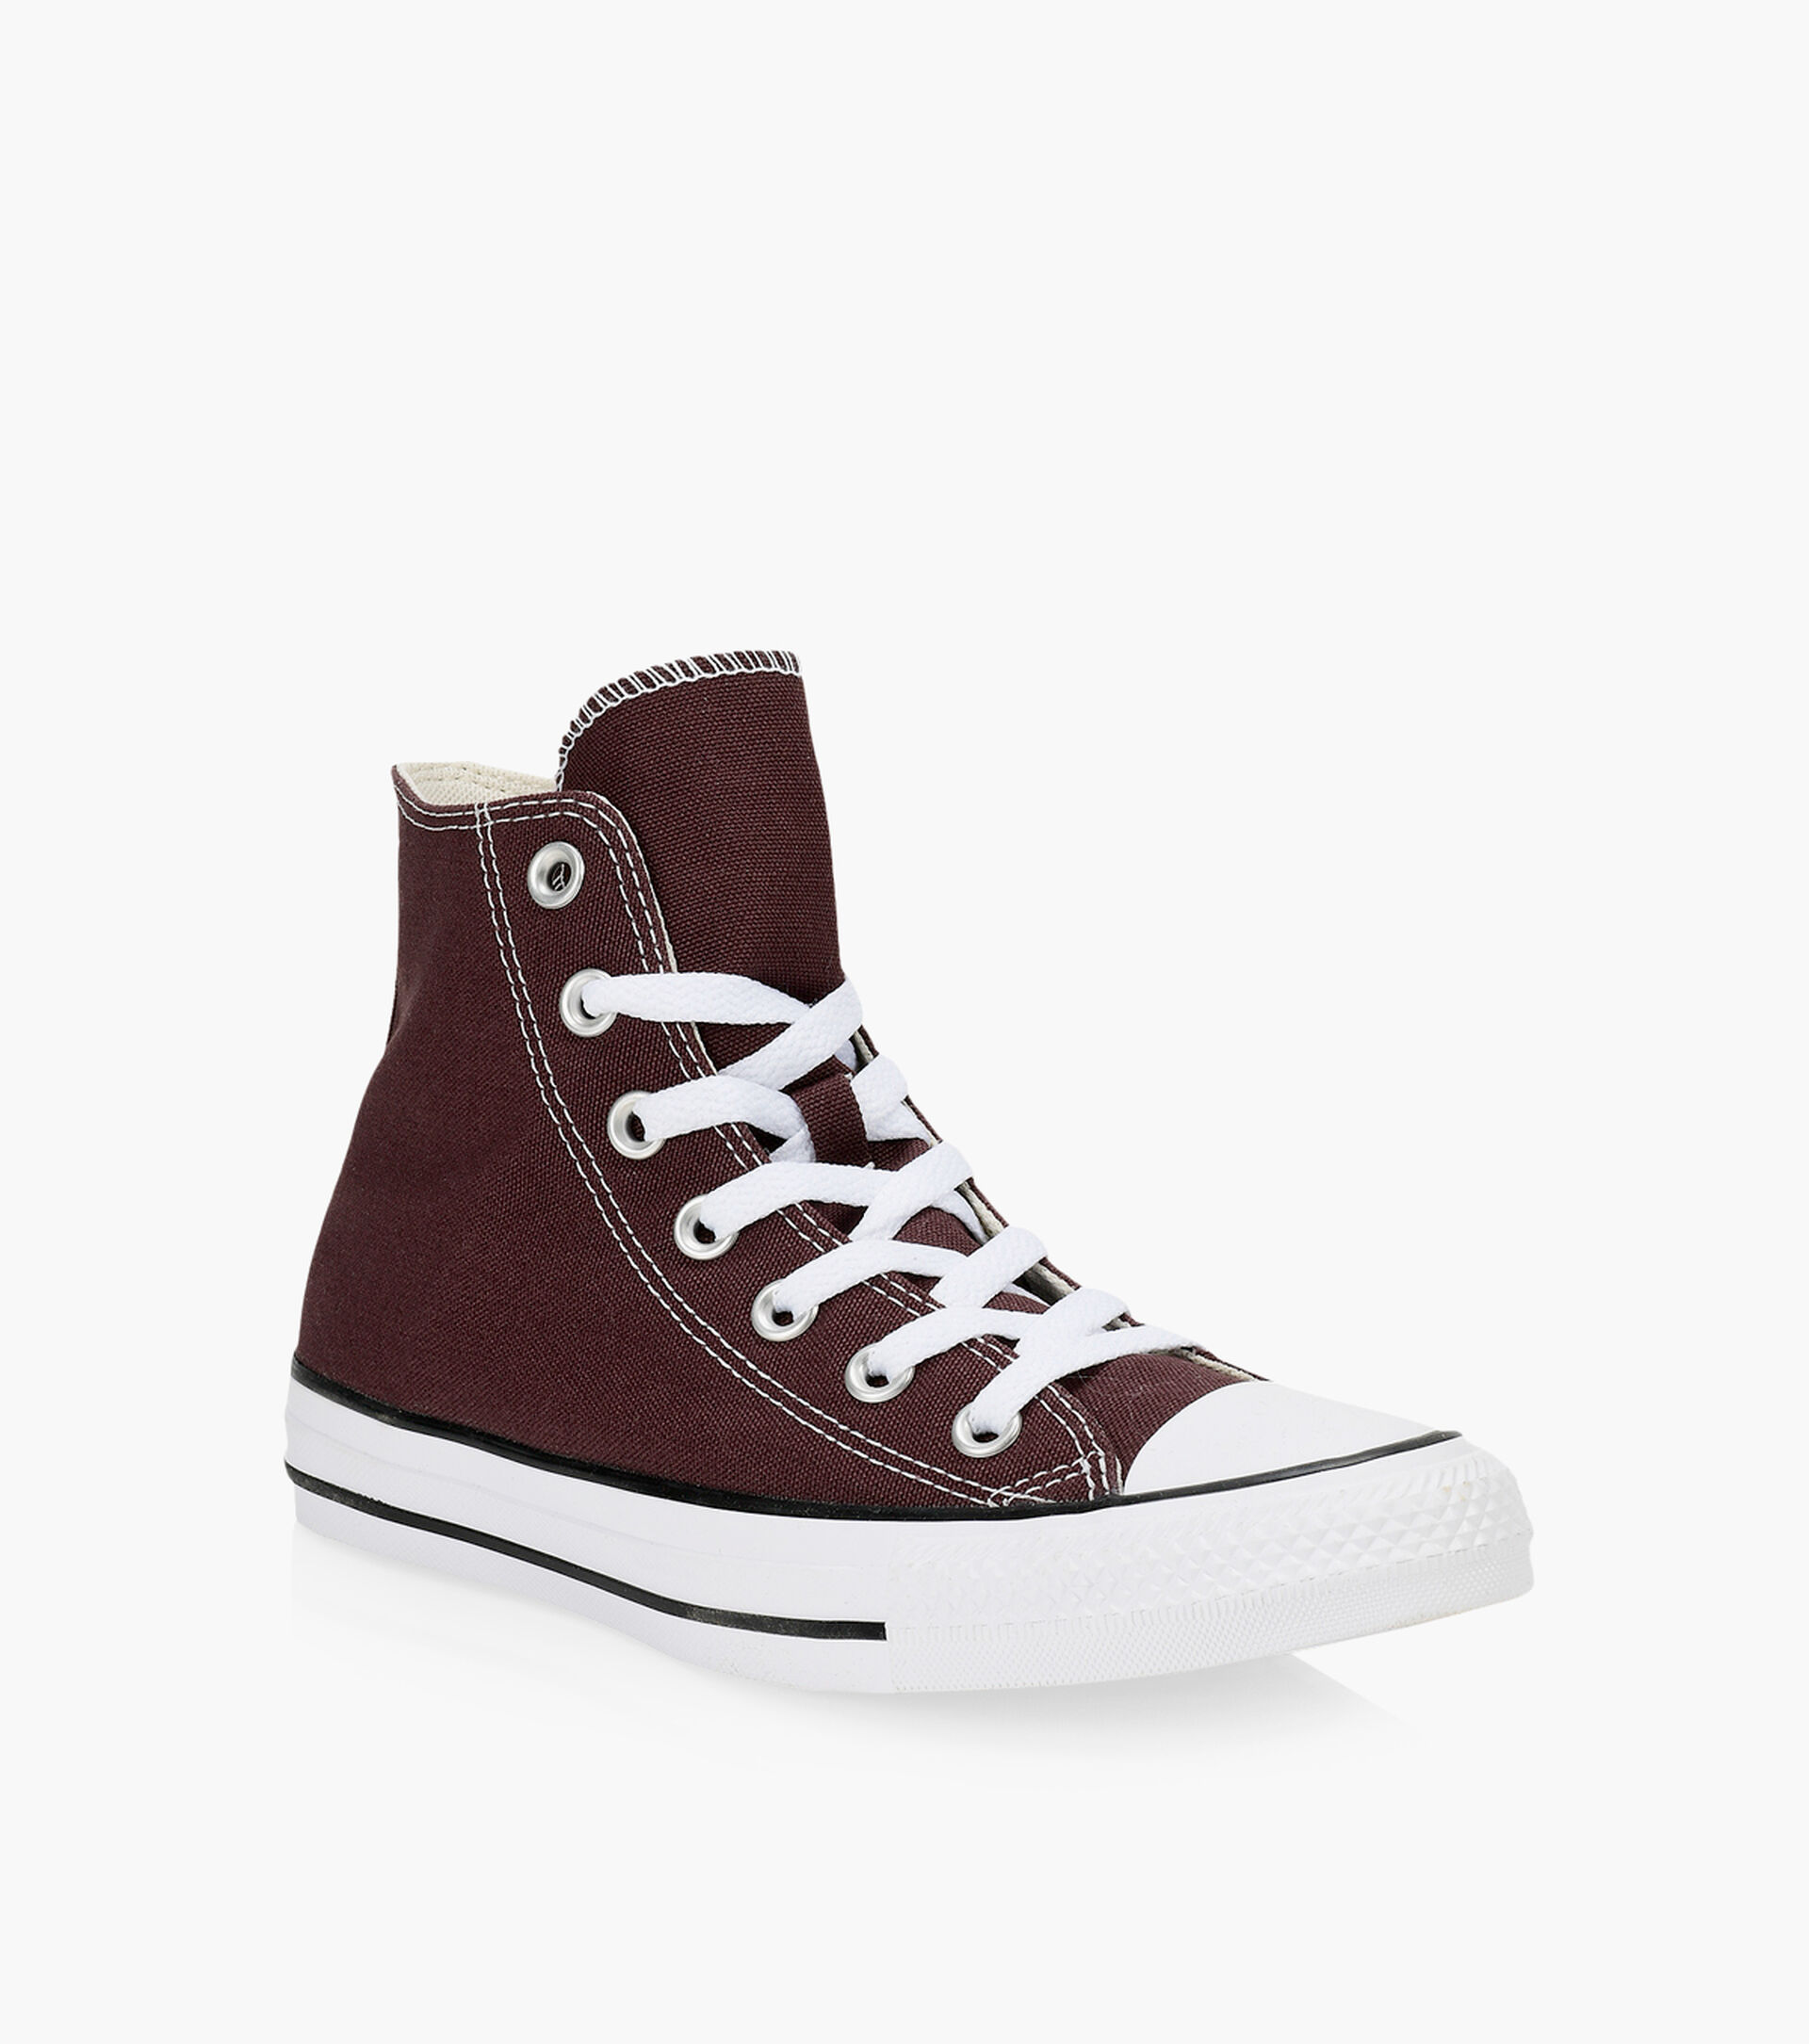 CONVERSE CHUCK TAYLOR ALL STAR CORE HI - Fabric | Browns Shoes